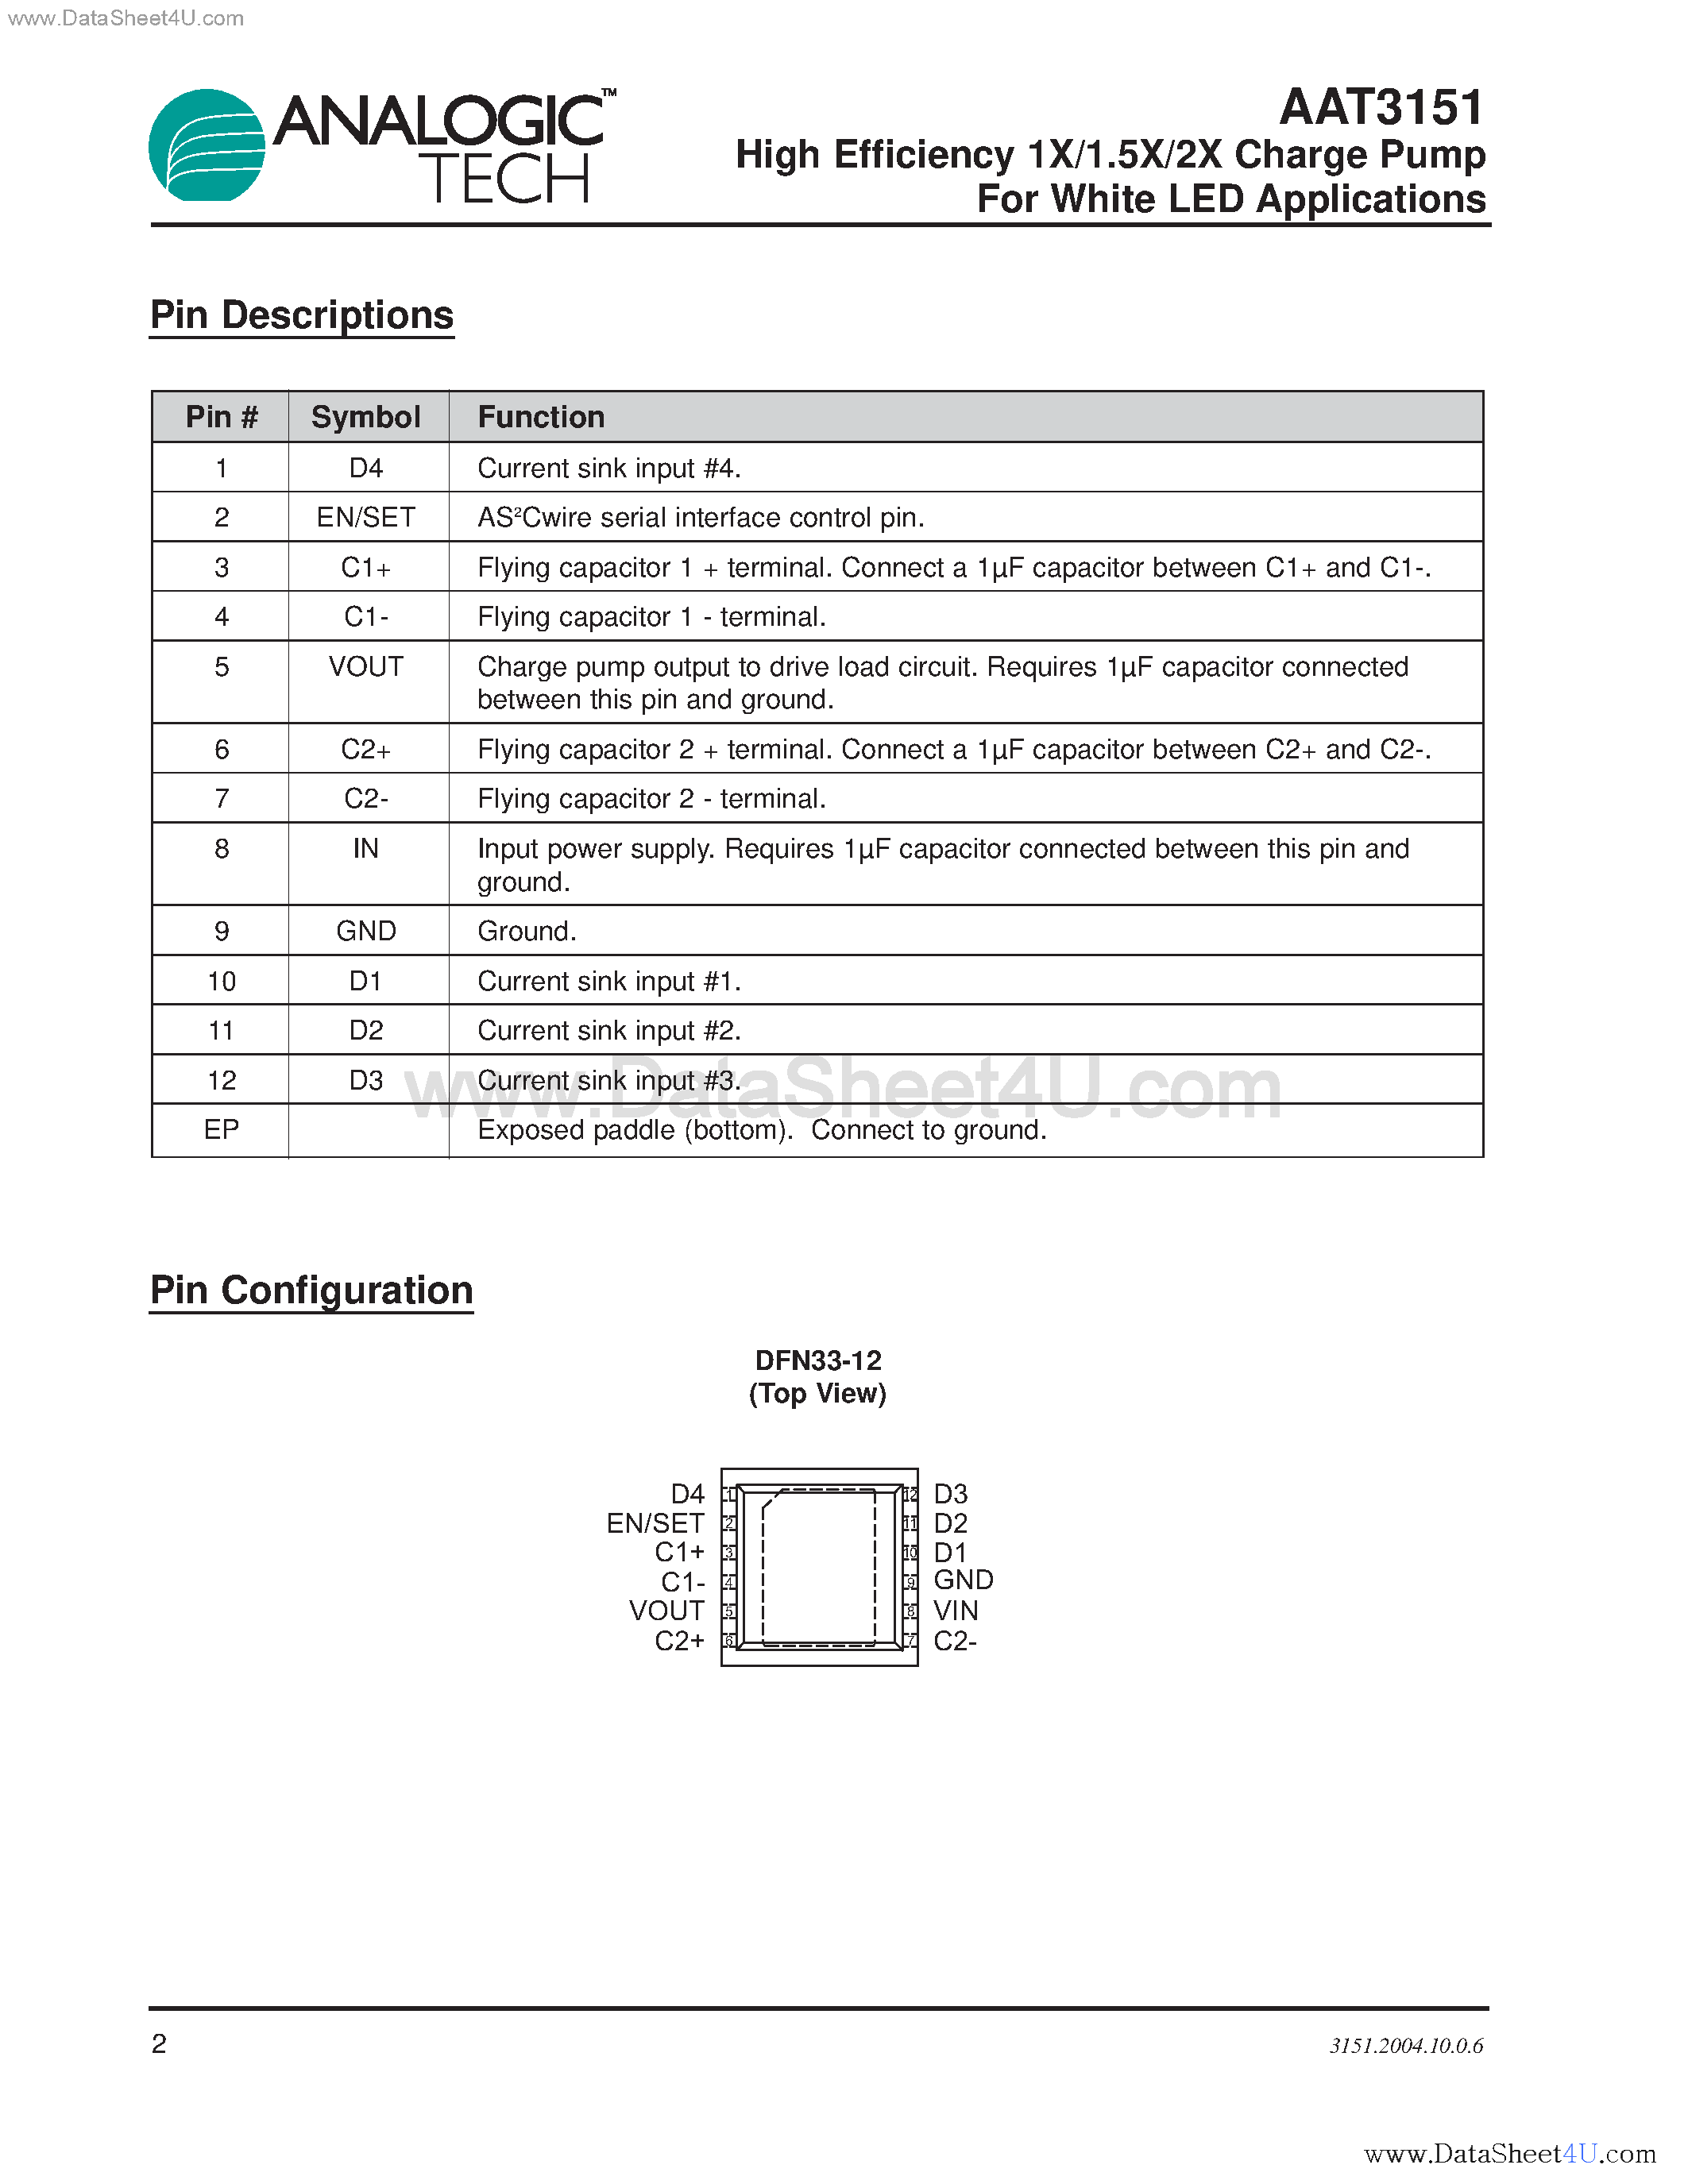 Datasheet AAT3151 - High Efficiency 1X/1.5X/2X Charge Pump For White LED Applications page 2